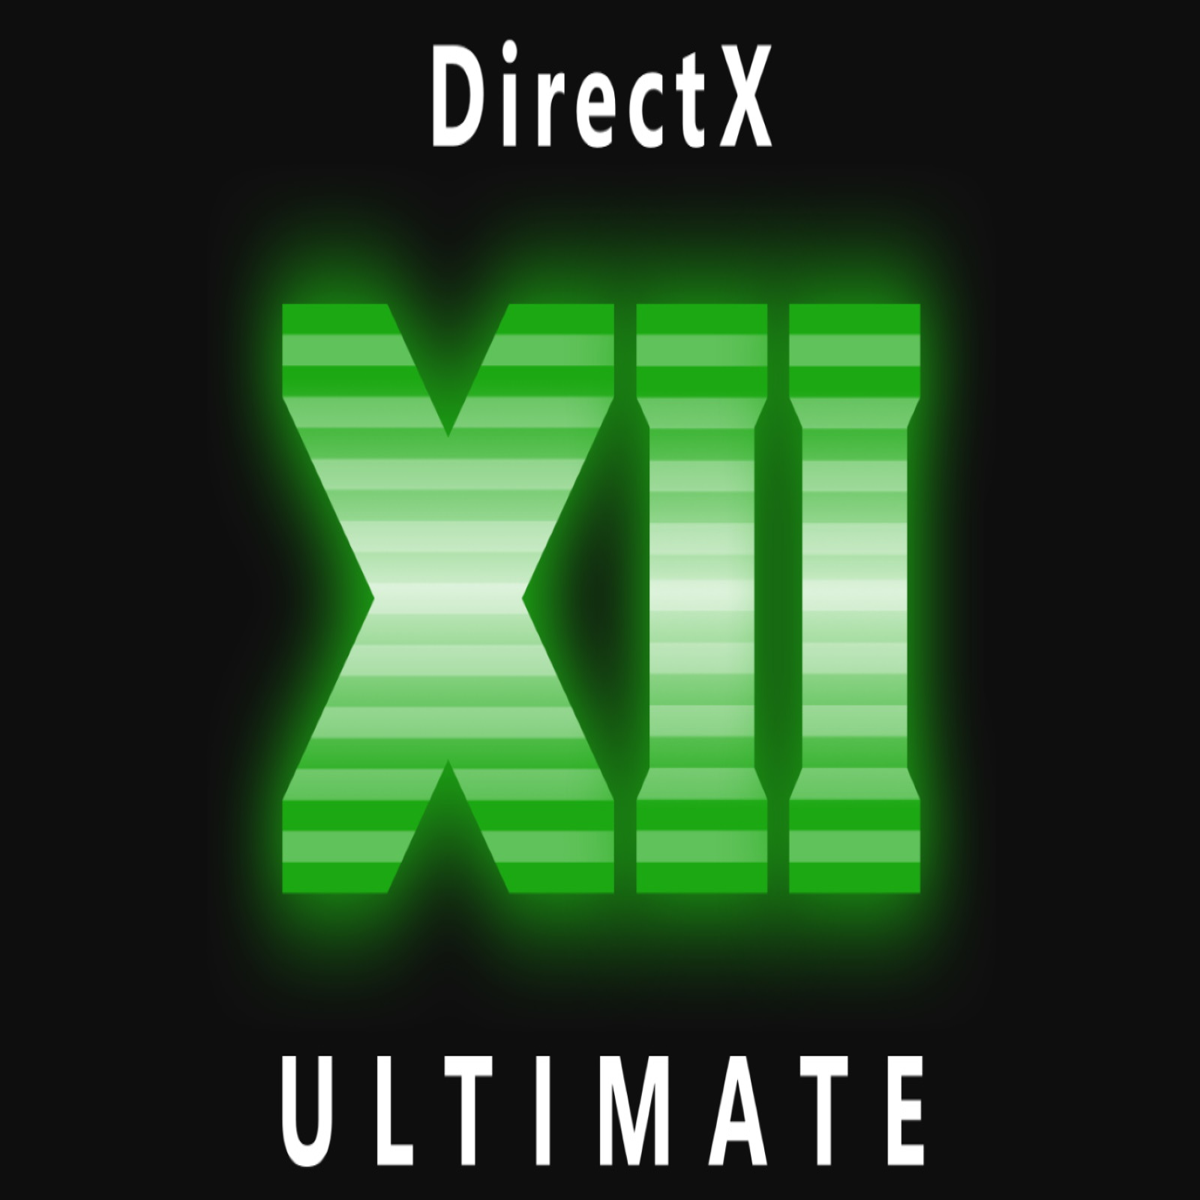 so is directx 12 ultimate only for next gen gpu's?